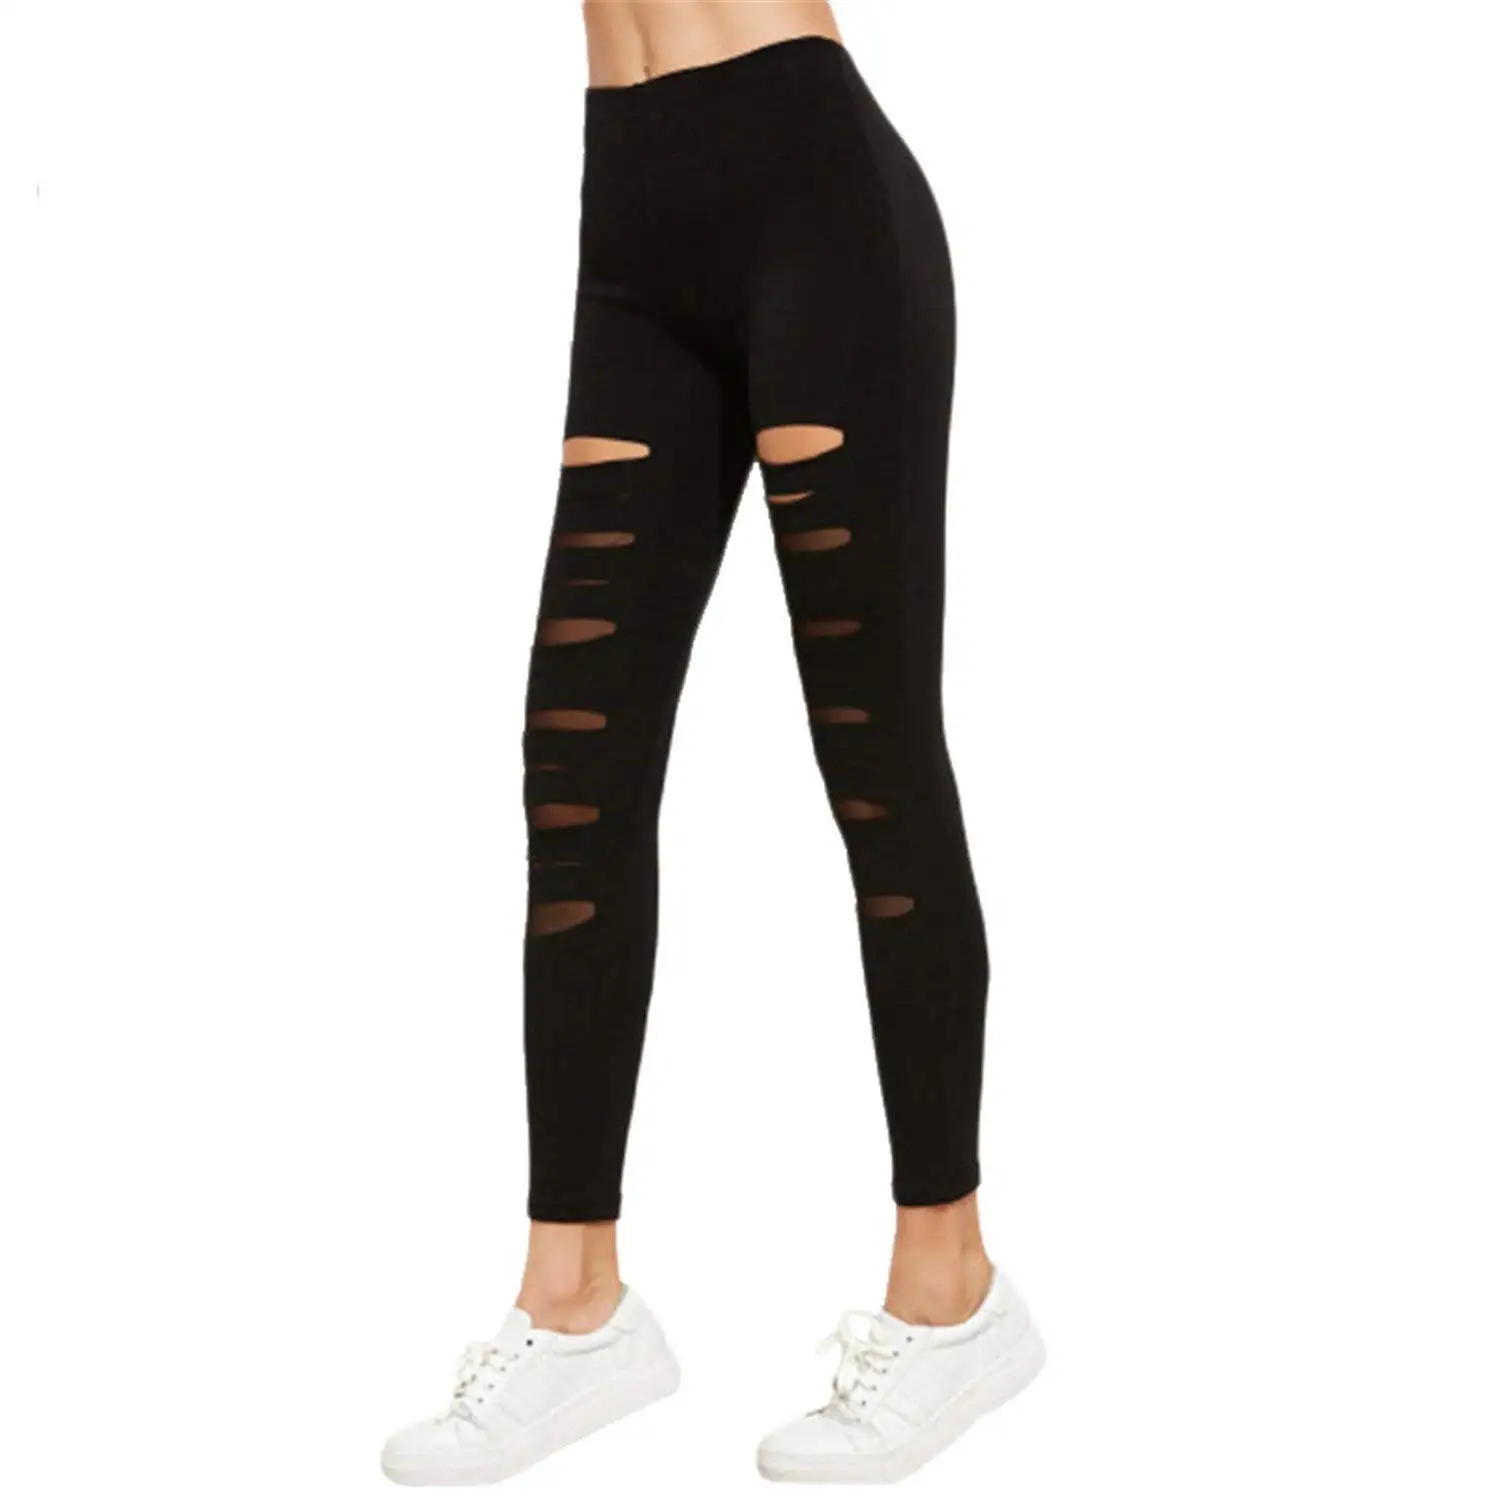 Cheap Hole In Leggings, find Hole In Leggings deals on line at Alibaba.com